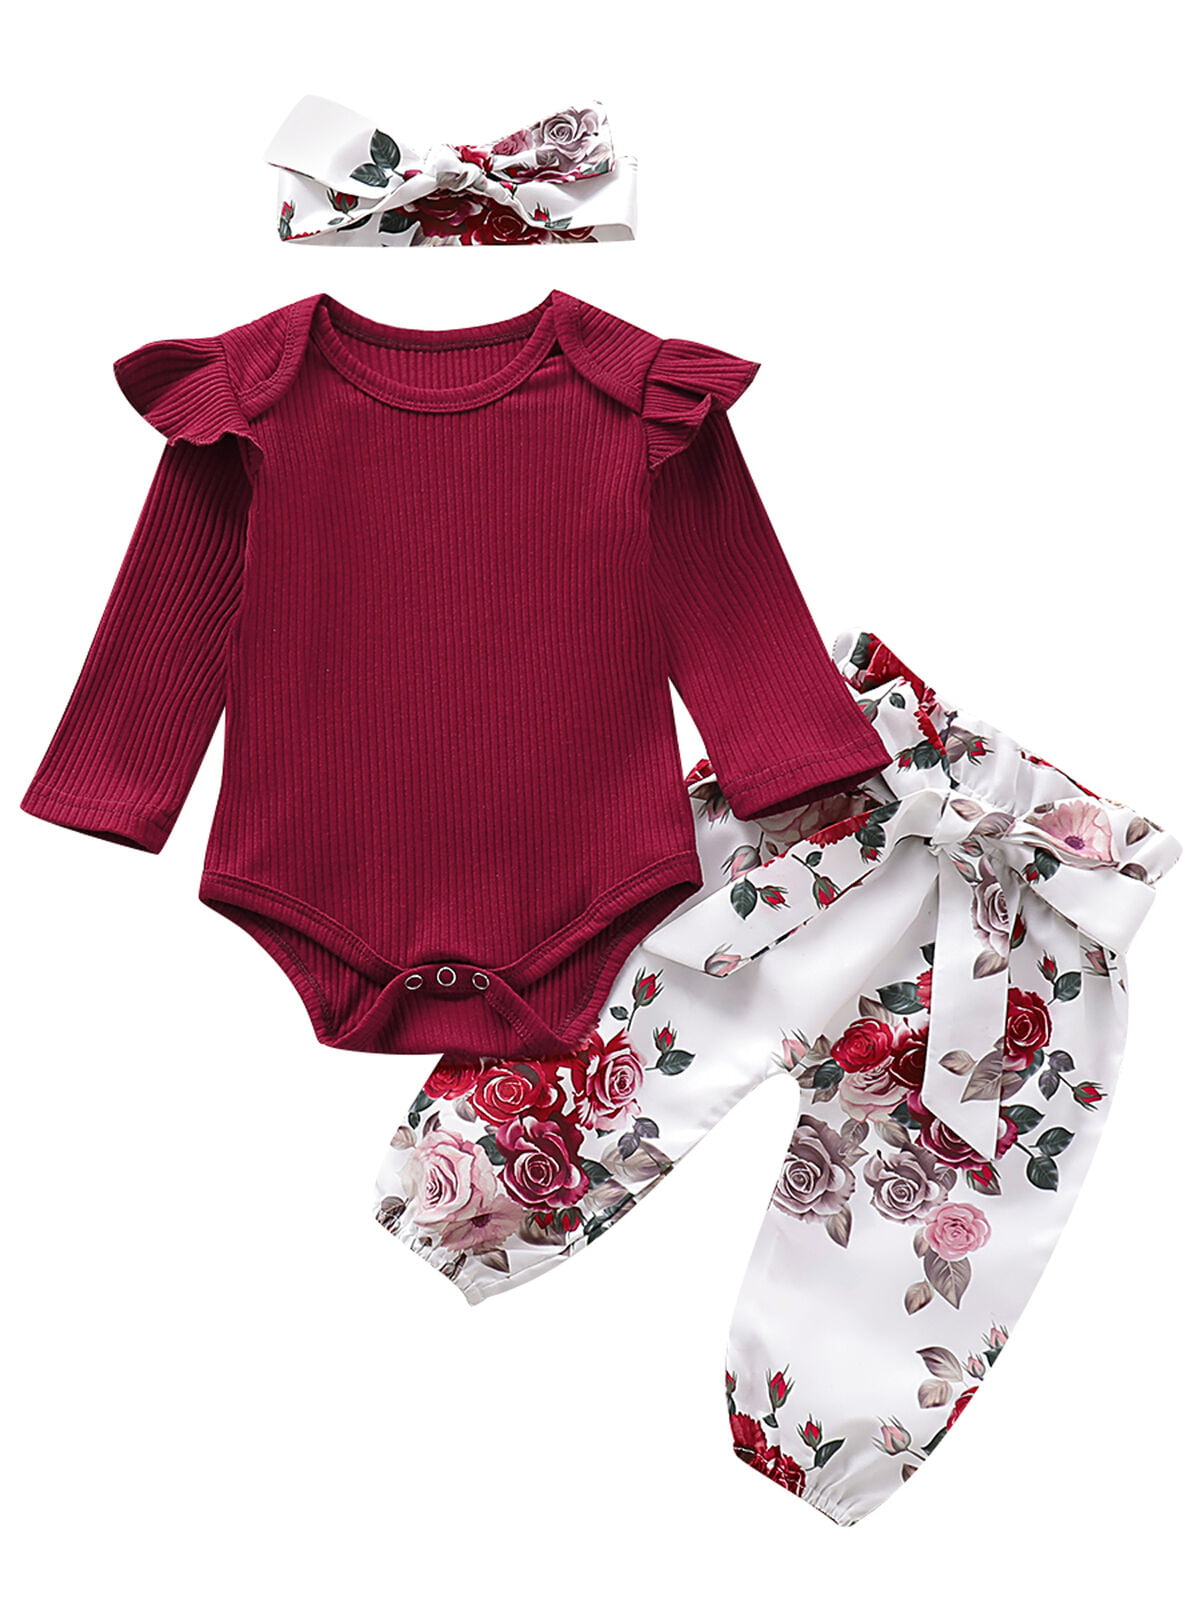 Infant Baby Girls Summer Autumn Outfits Flutter Solid Color Knitted Cotton Tops Striped Floral Pants Bodysuits 2Pcs